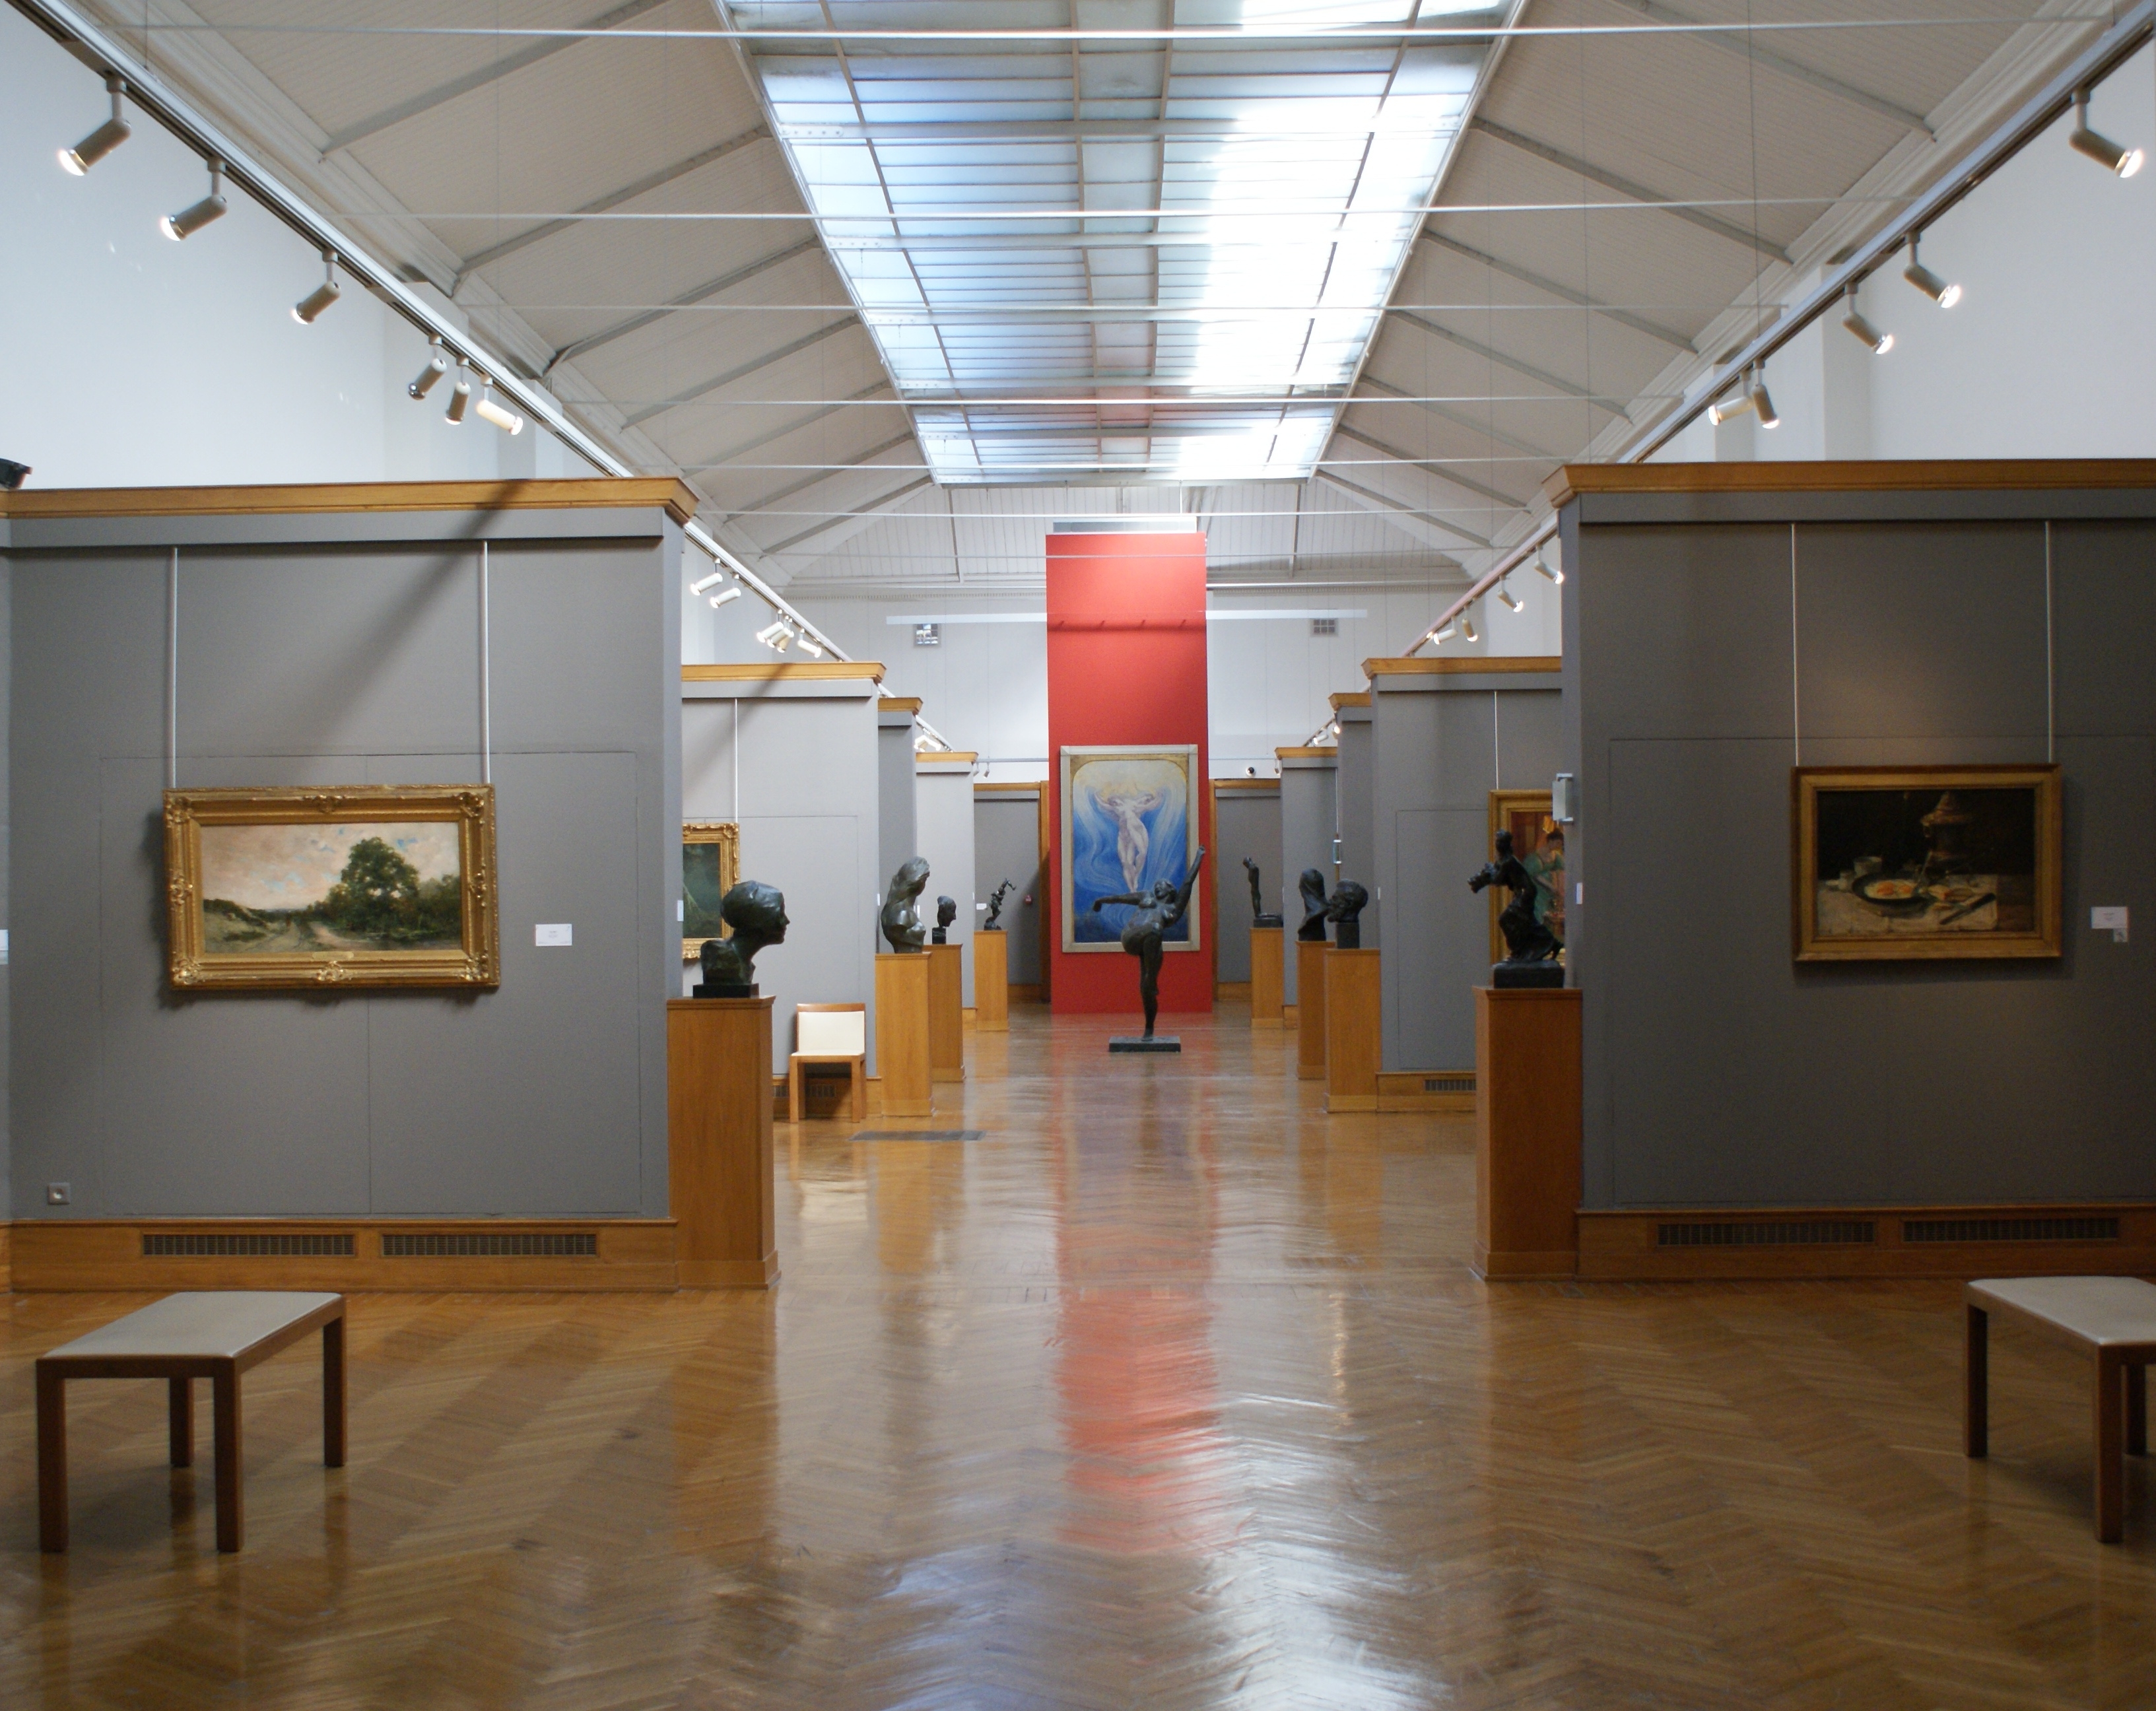 The permanent collections of Museum of Ixelles